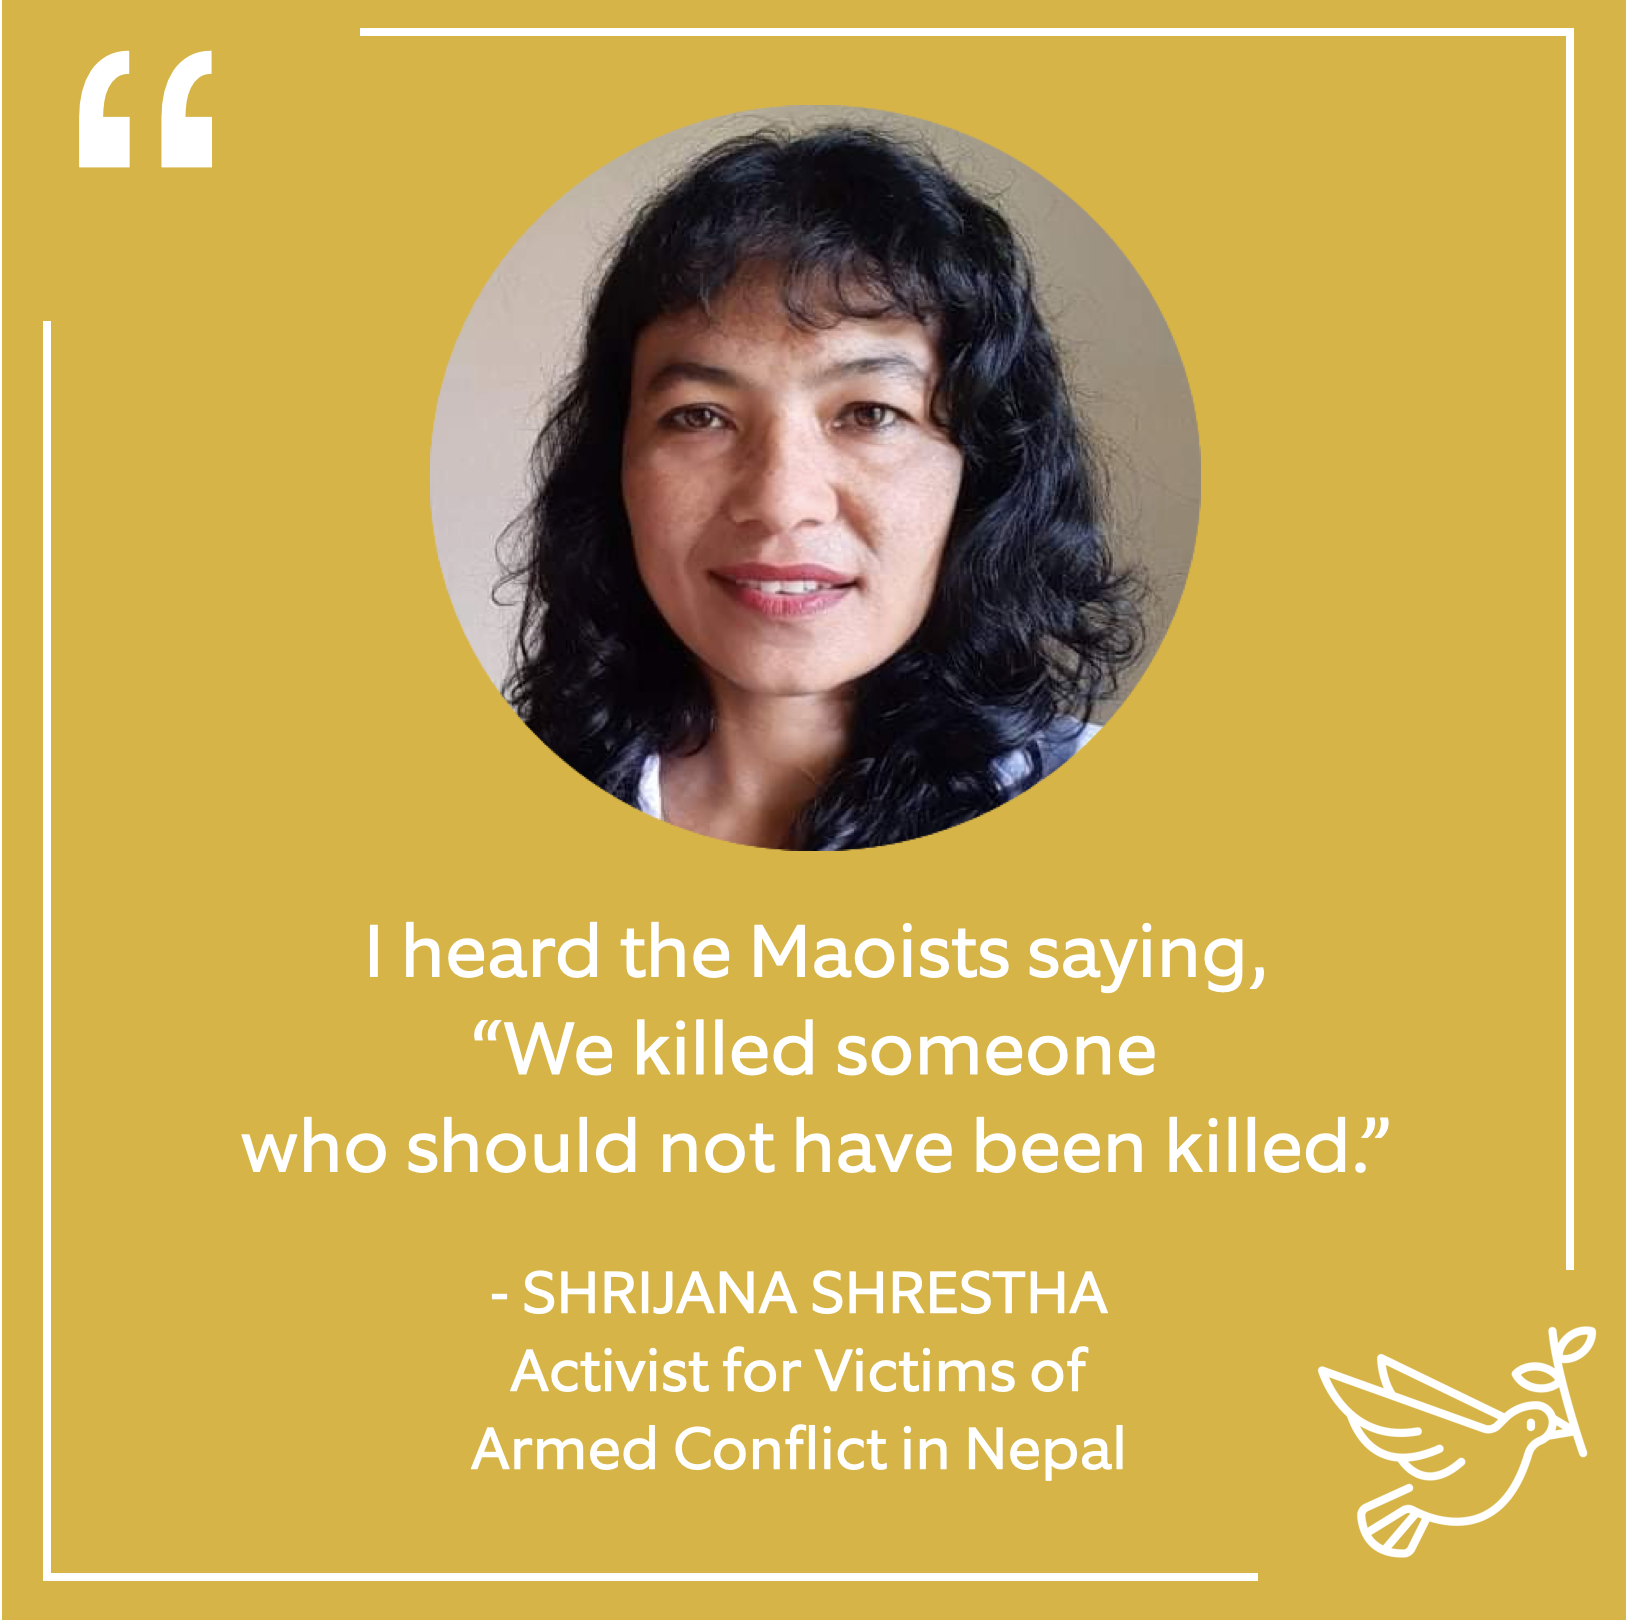 Shrijana Shrestha - Activist for Victims of the Armed Conflict in Nepal 